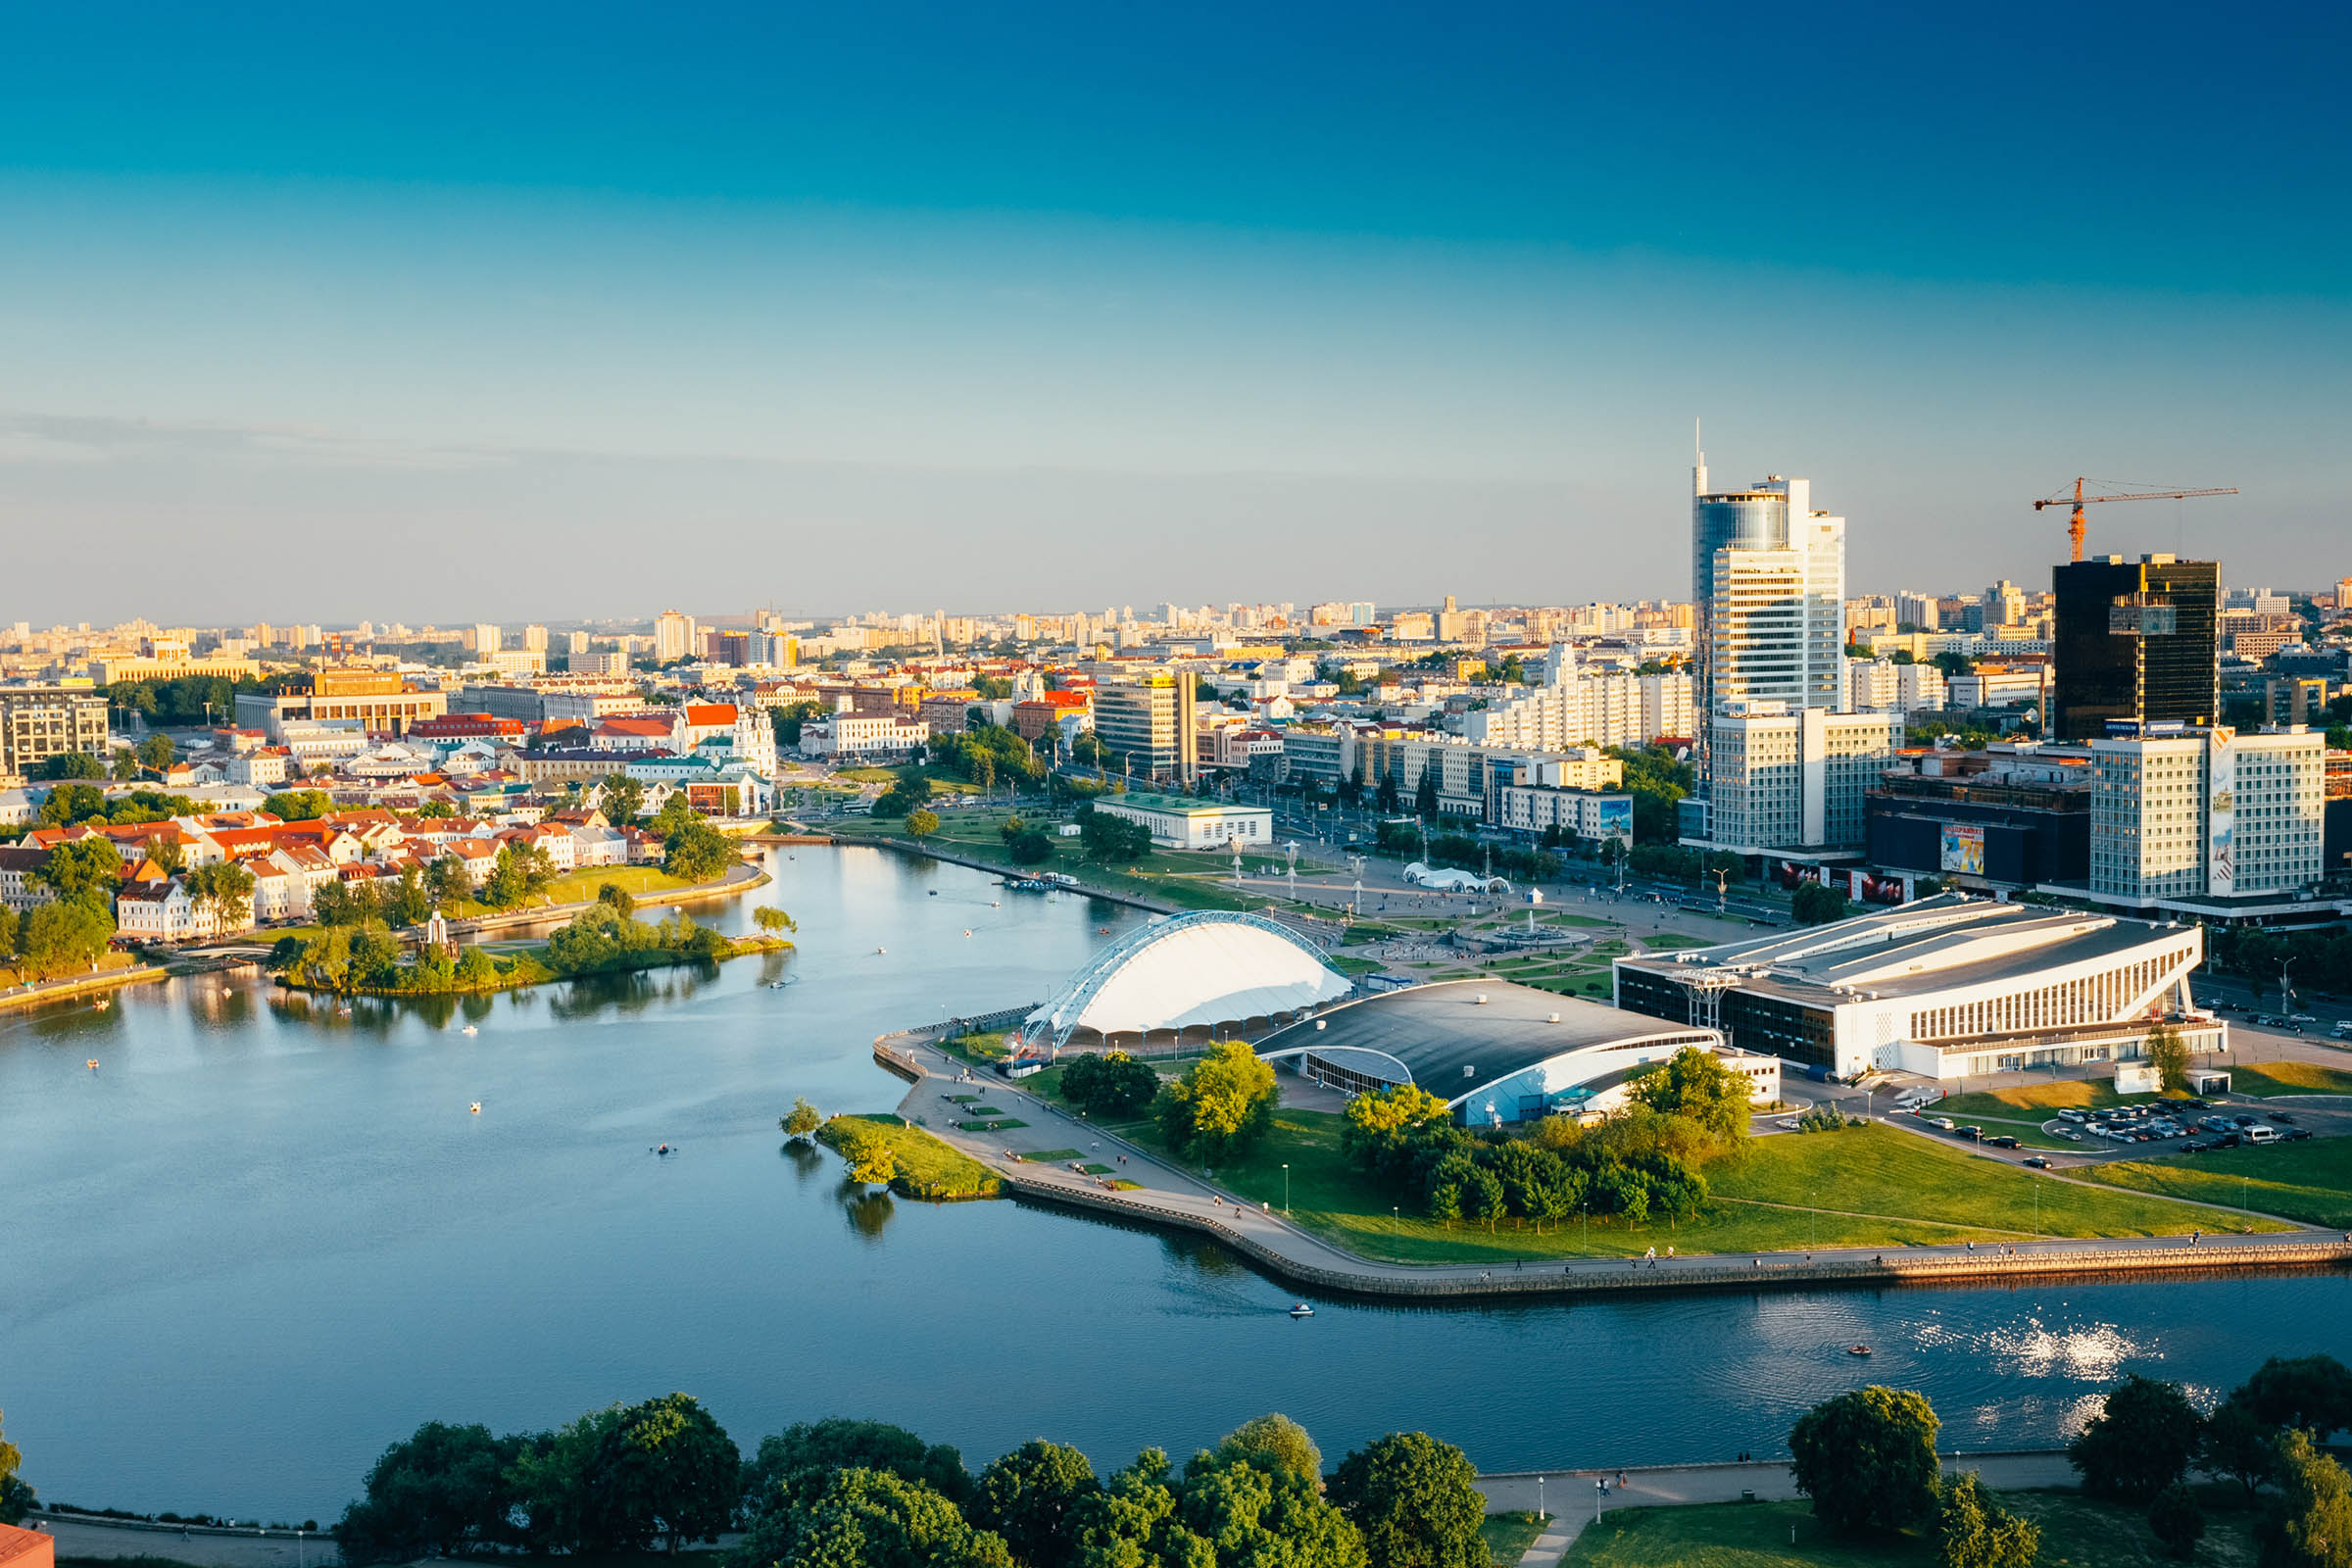 Belarus has free economic zones in places such as Minsk, with general incentives that include five years’ profit tax exemption and zero property tax. Photo: Shutterstock